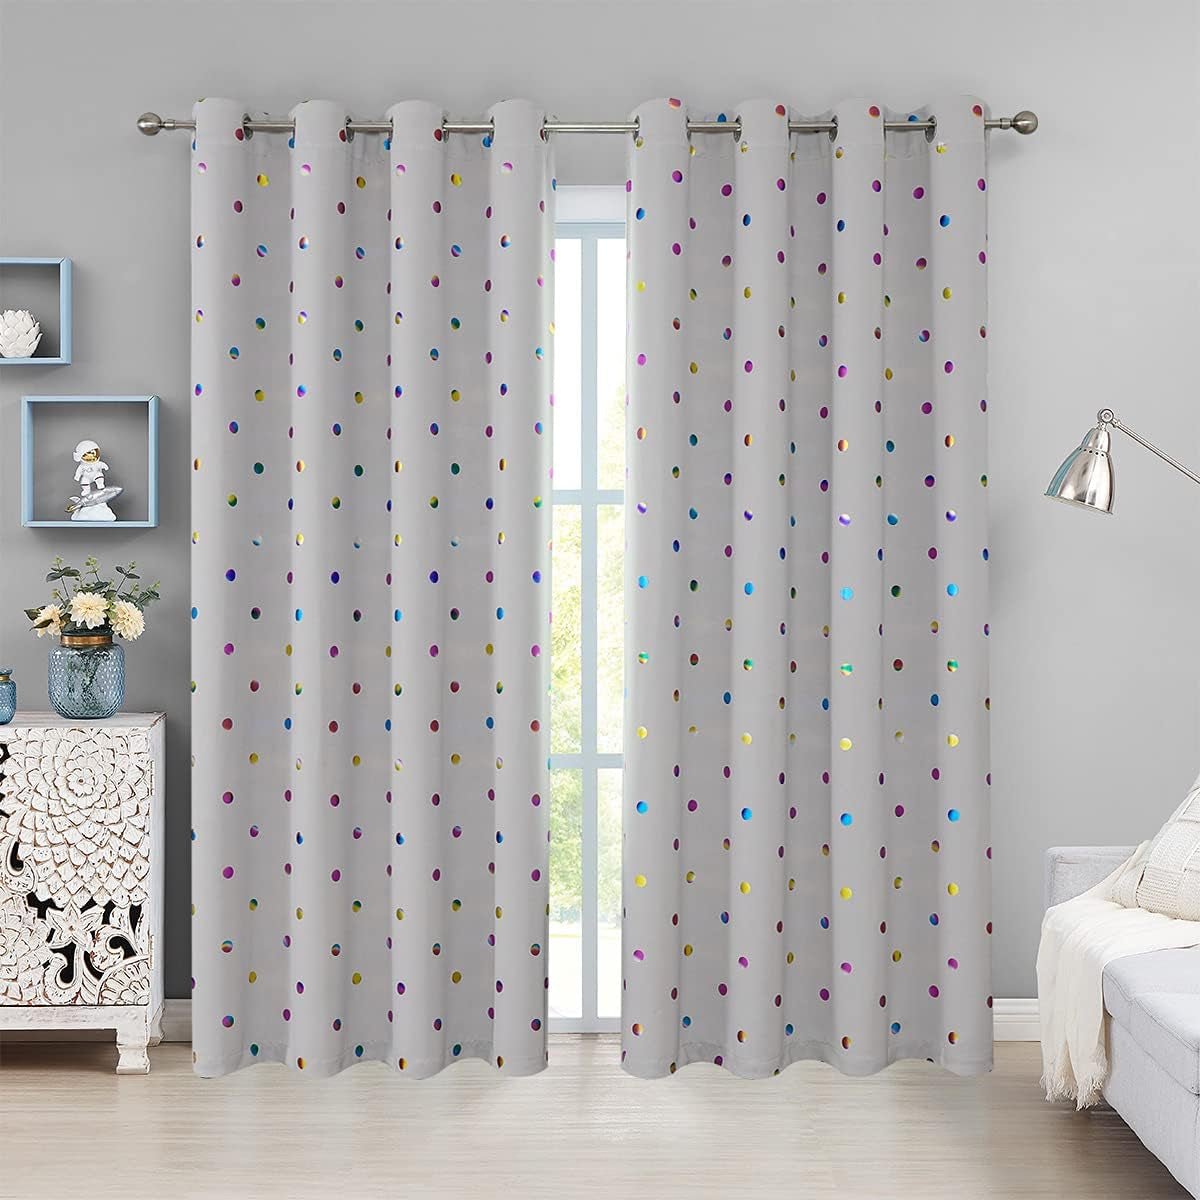 Black Blackout Curtains for Bedroom Living-Room Holiday Season Metallic Polka Dots Pattern Curtains for Nursery 52 X 95 Inch Grommet Triple Weave Thermal Insulated Draperies for Kids Bedroom, 2Pcs  Urban Lotus Multi/Grey 52"X84" 